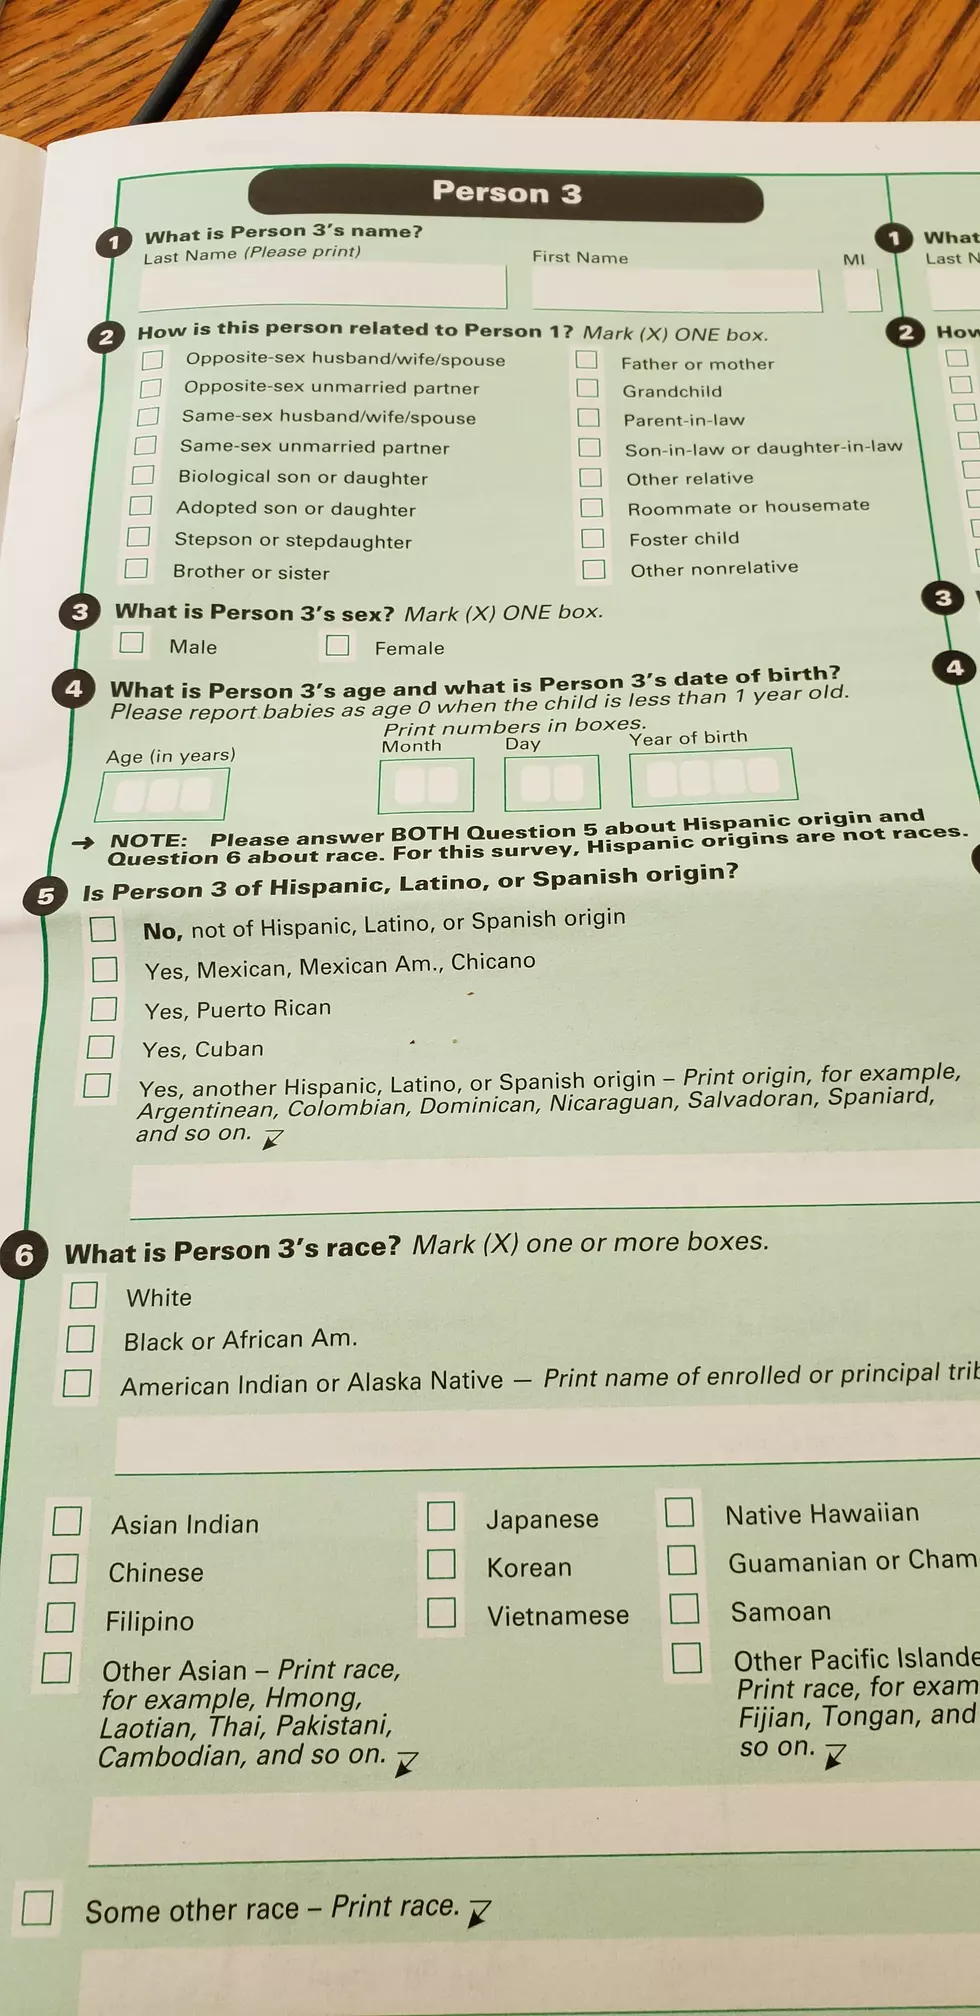 Will I Go To Jail If I Don't Fill Out The 2019 Census?